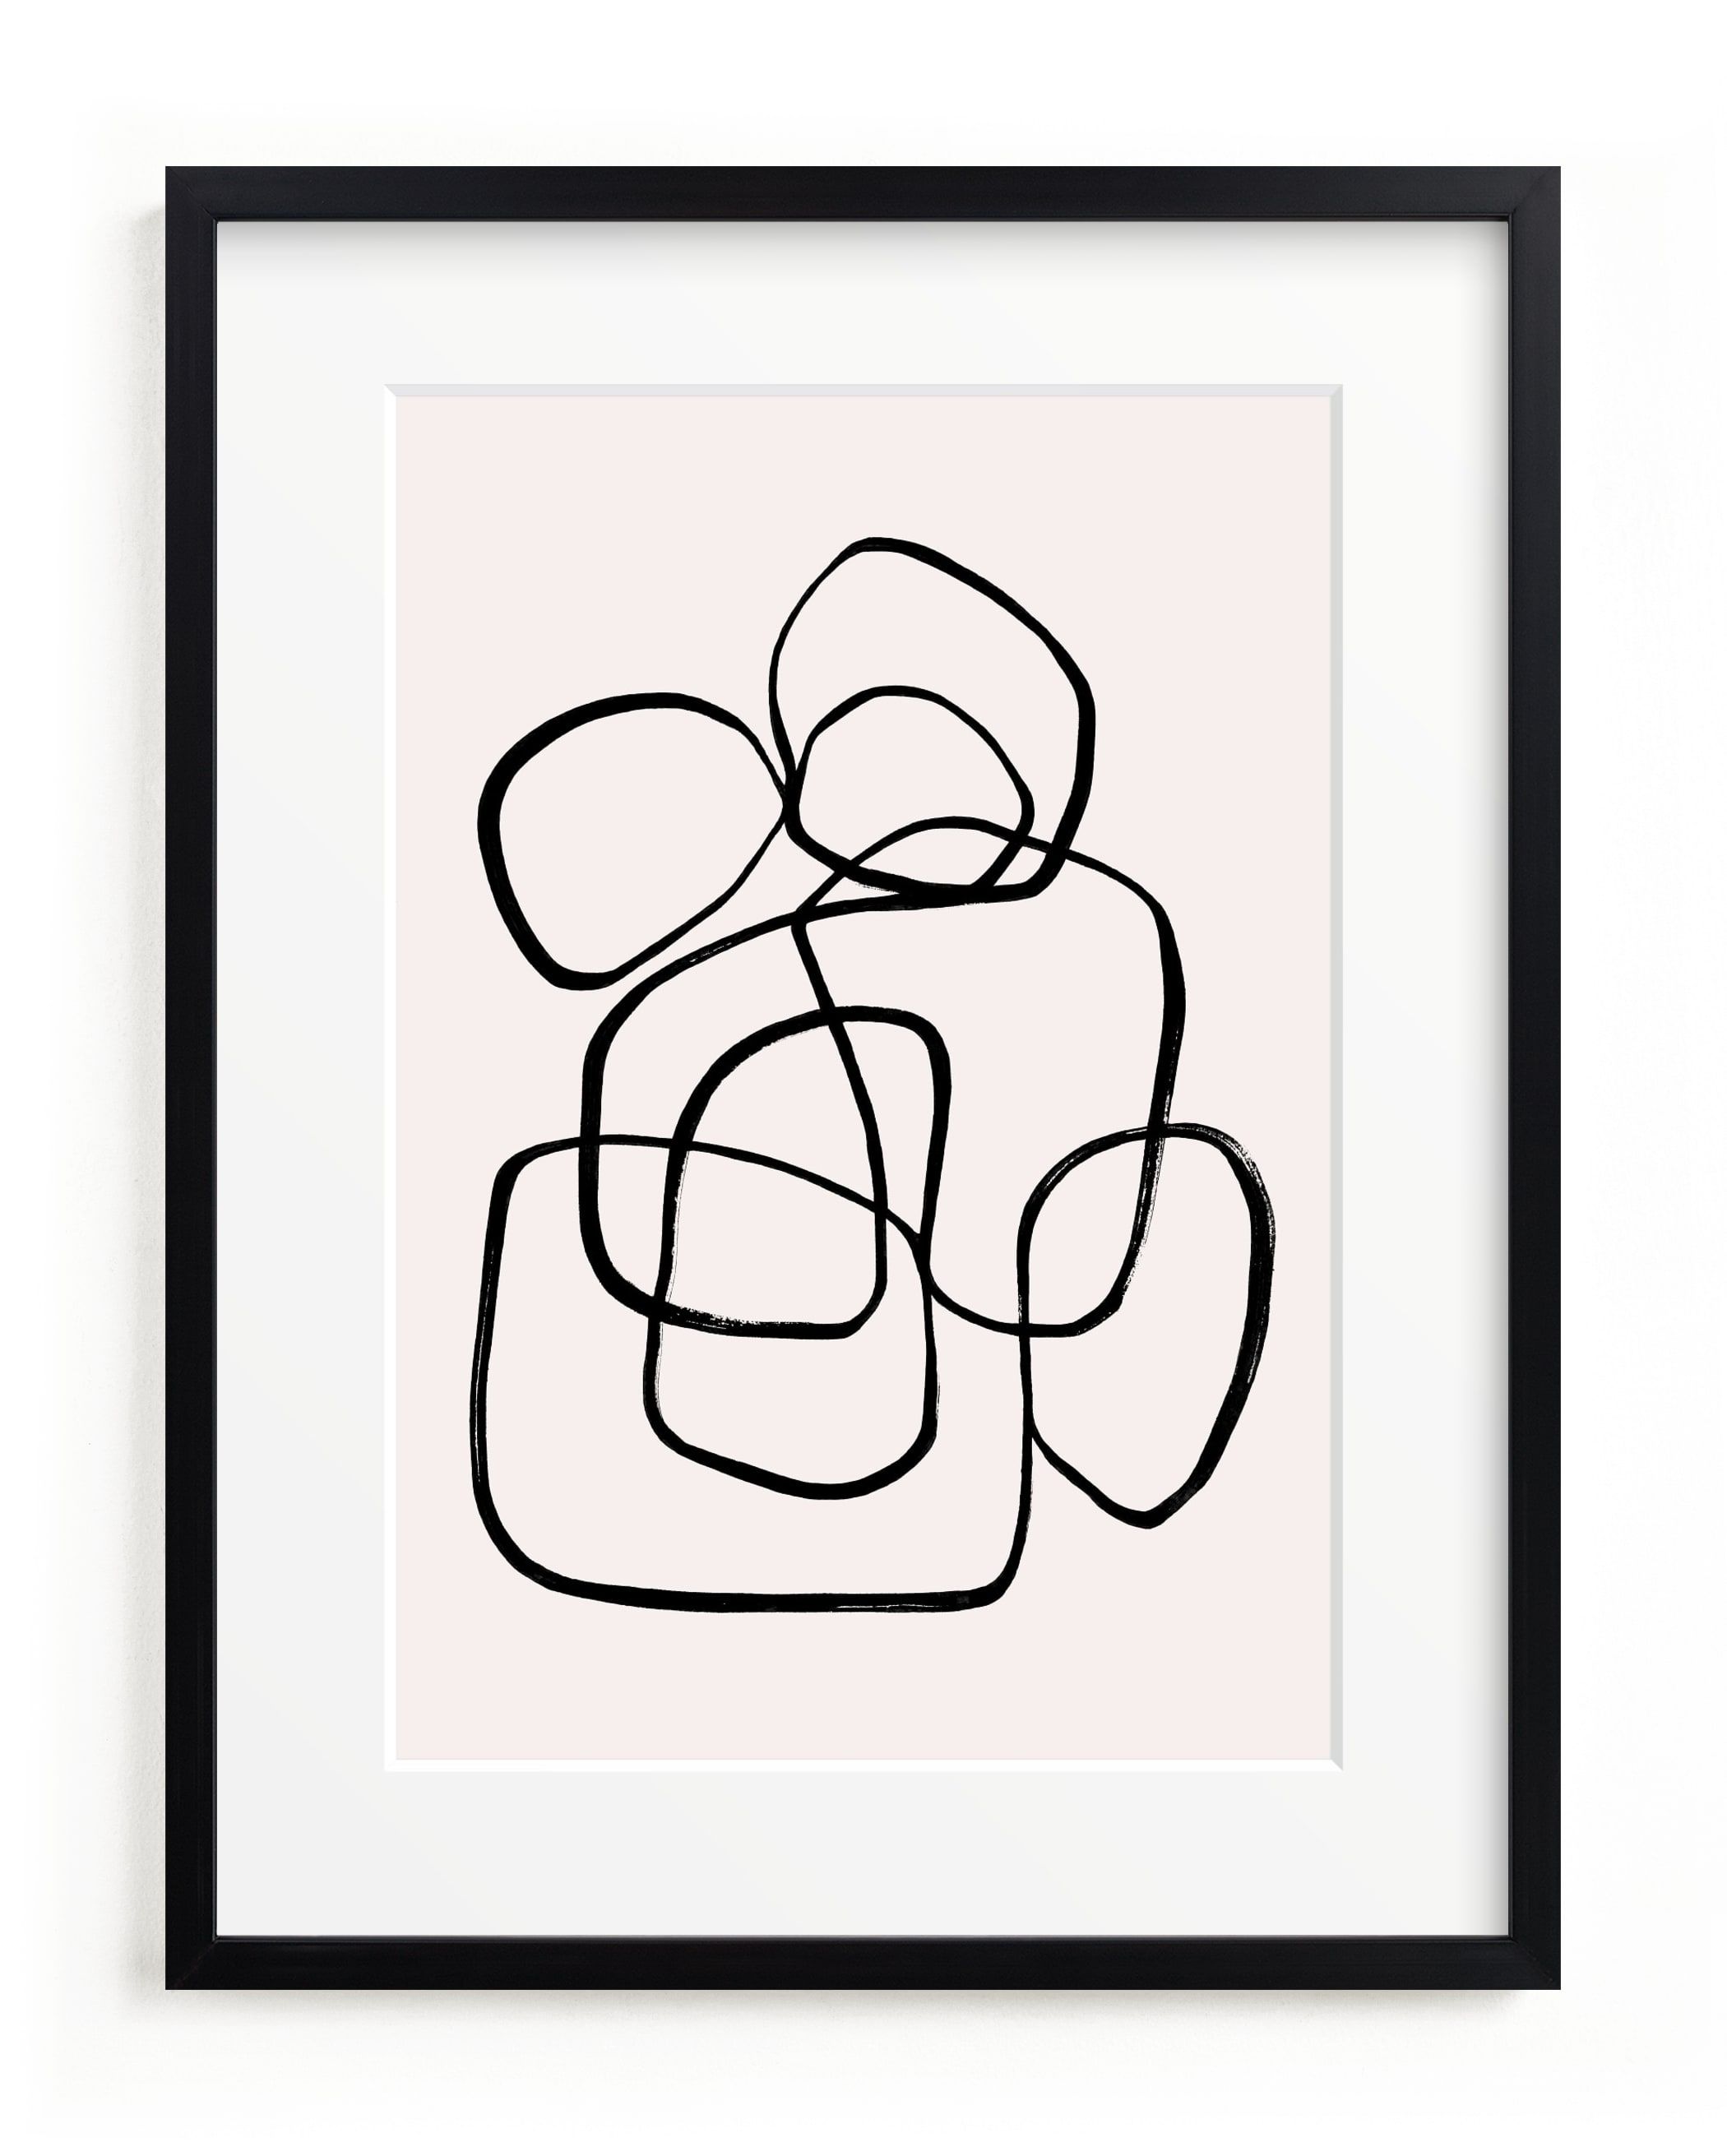 "Abstract line 1" - Drawing Limited Edition Art Print by Cass Loh. | Minted